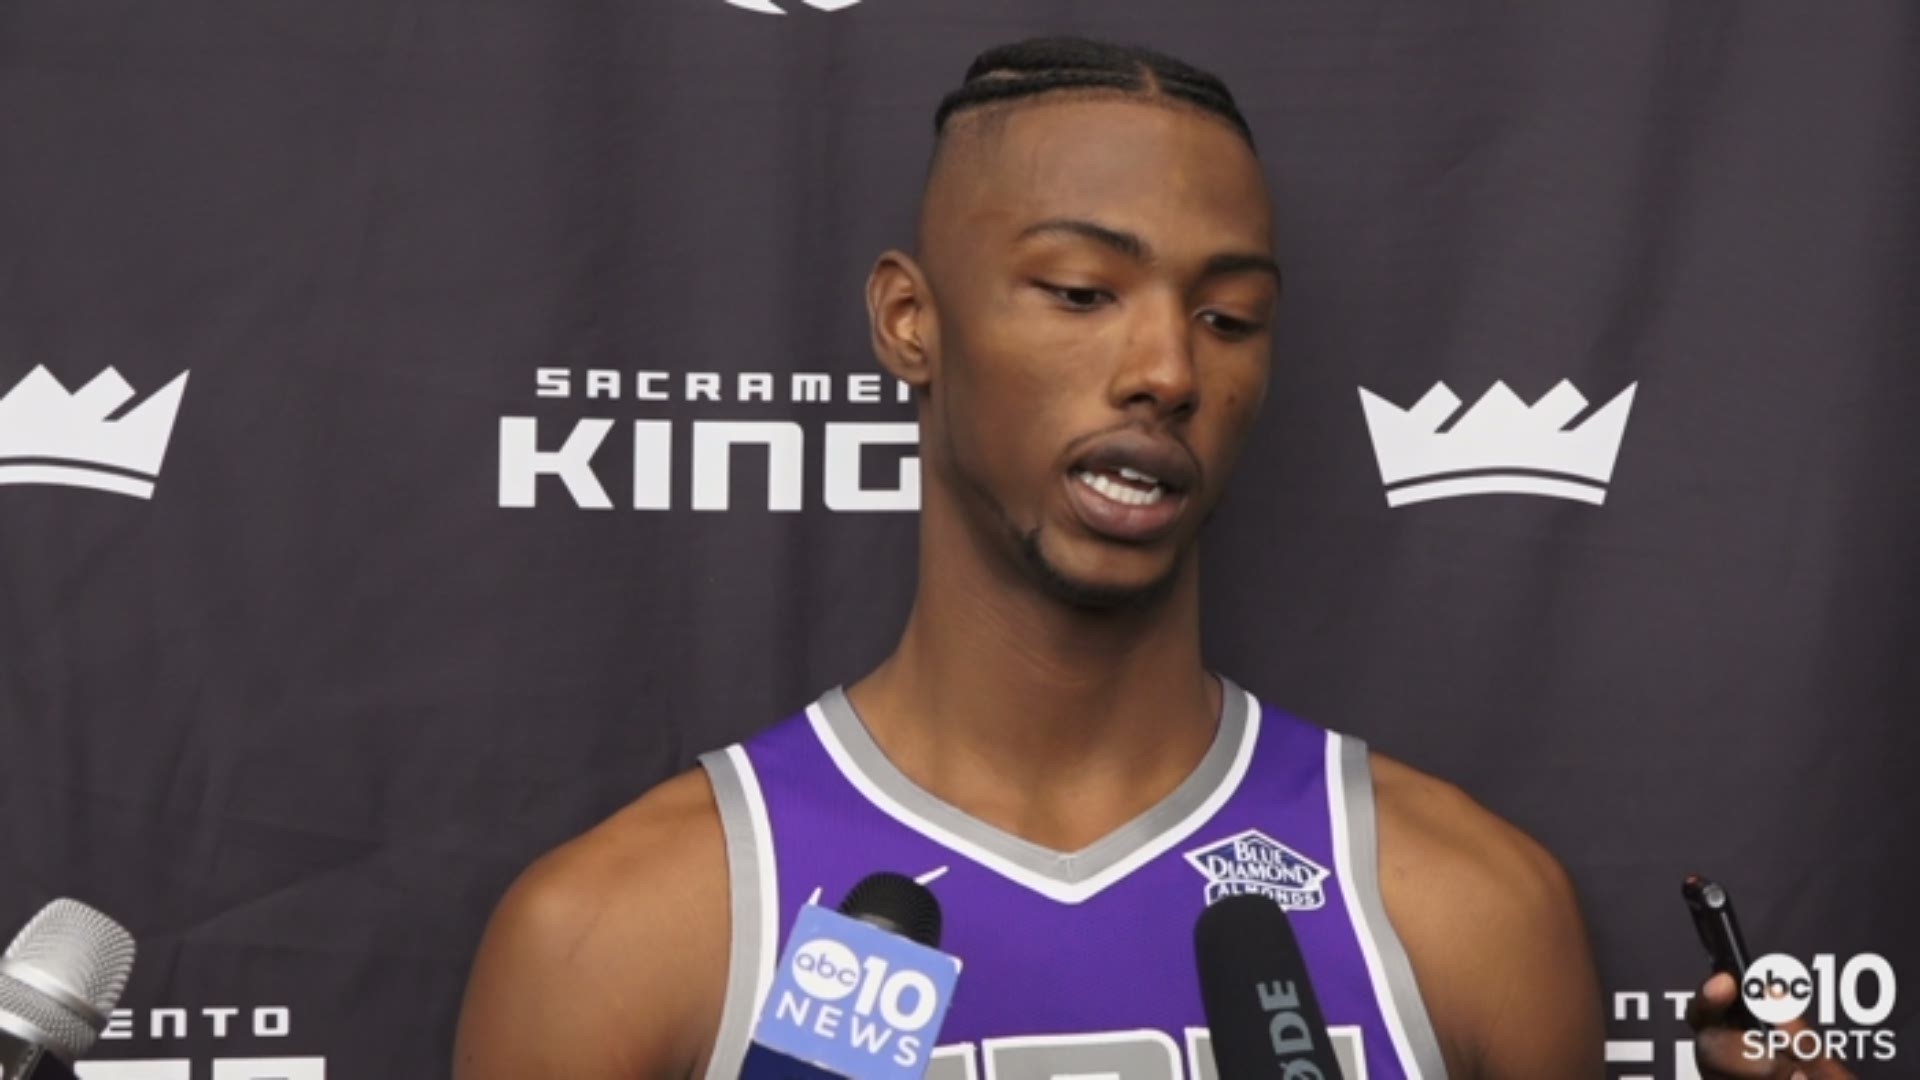 Kings forward Harry Giles is excited to get into training camp and play in his first NBA game. He talks about the boost of confidence he received from his performance at Summer League and embracing the role of underdogs in the talented Western Conference.